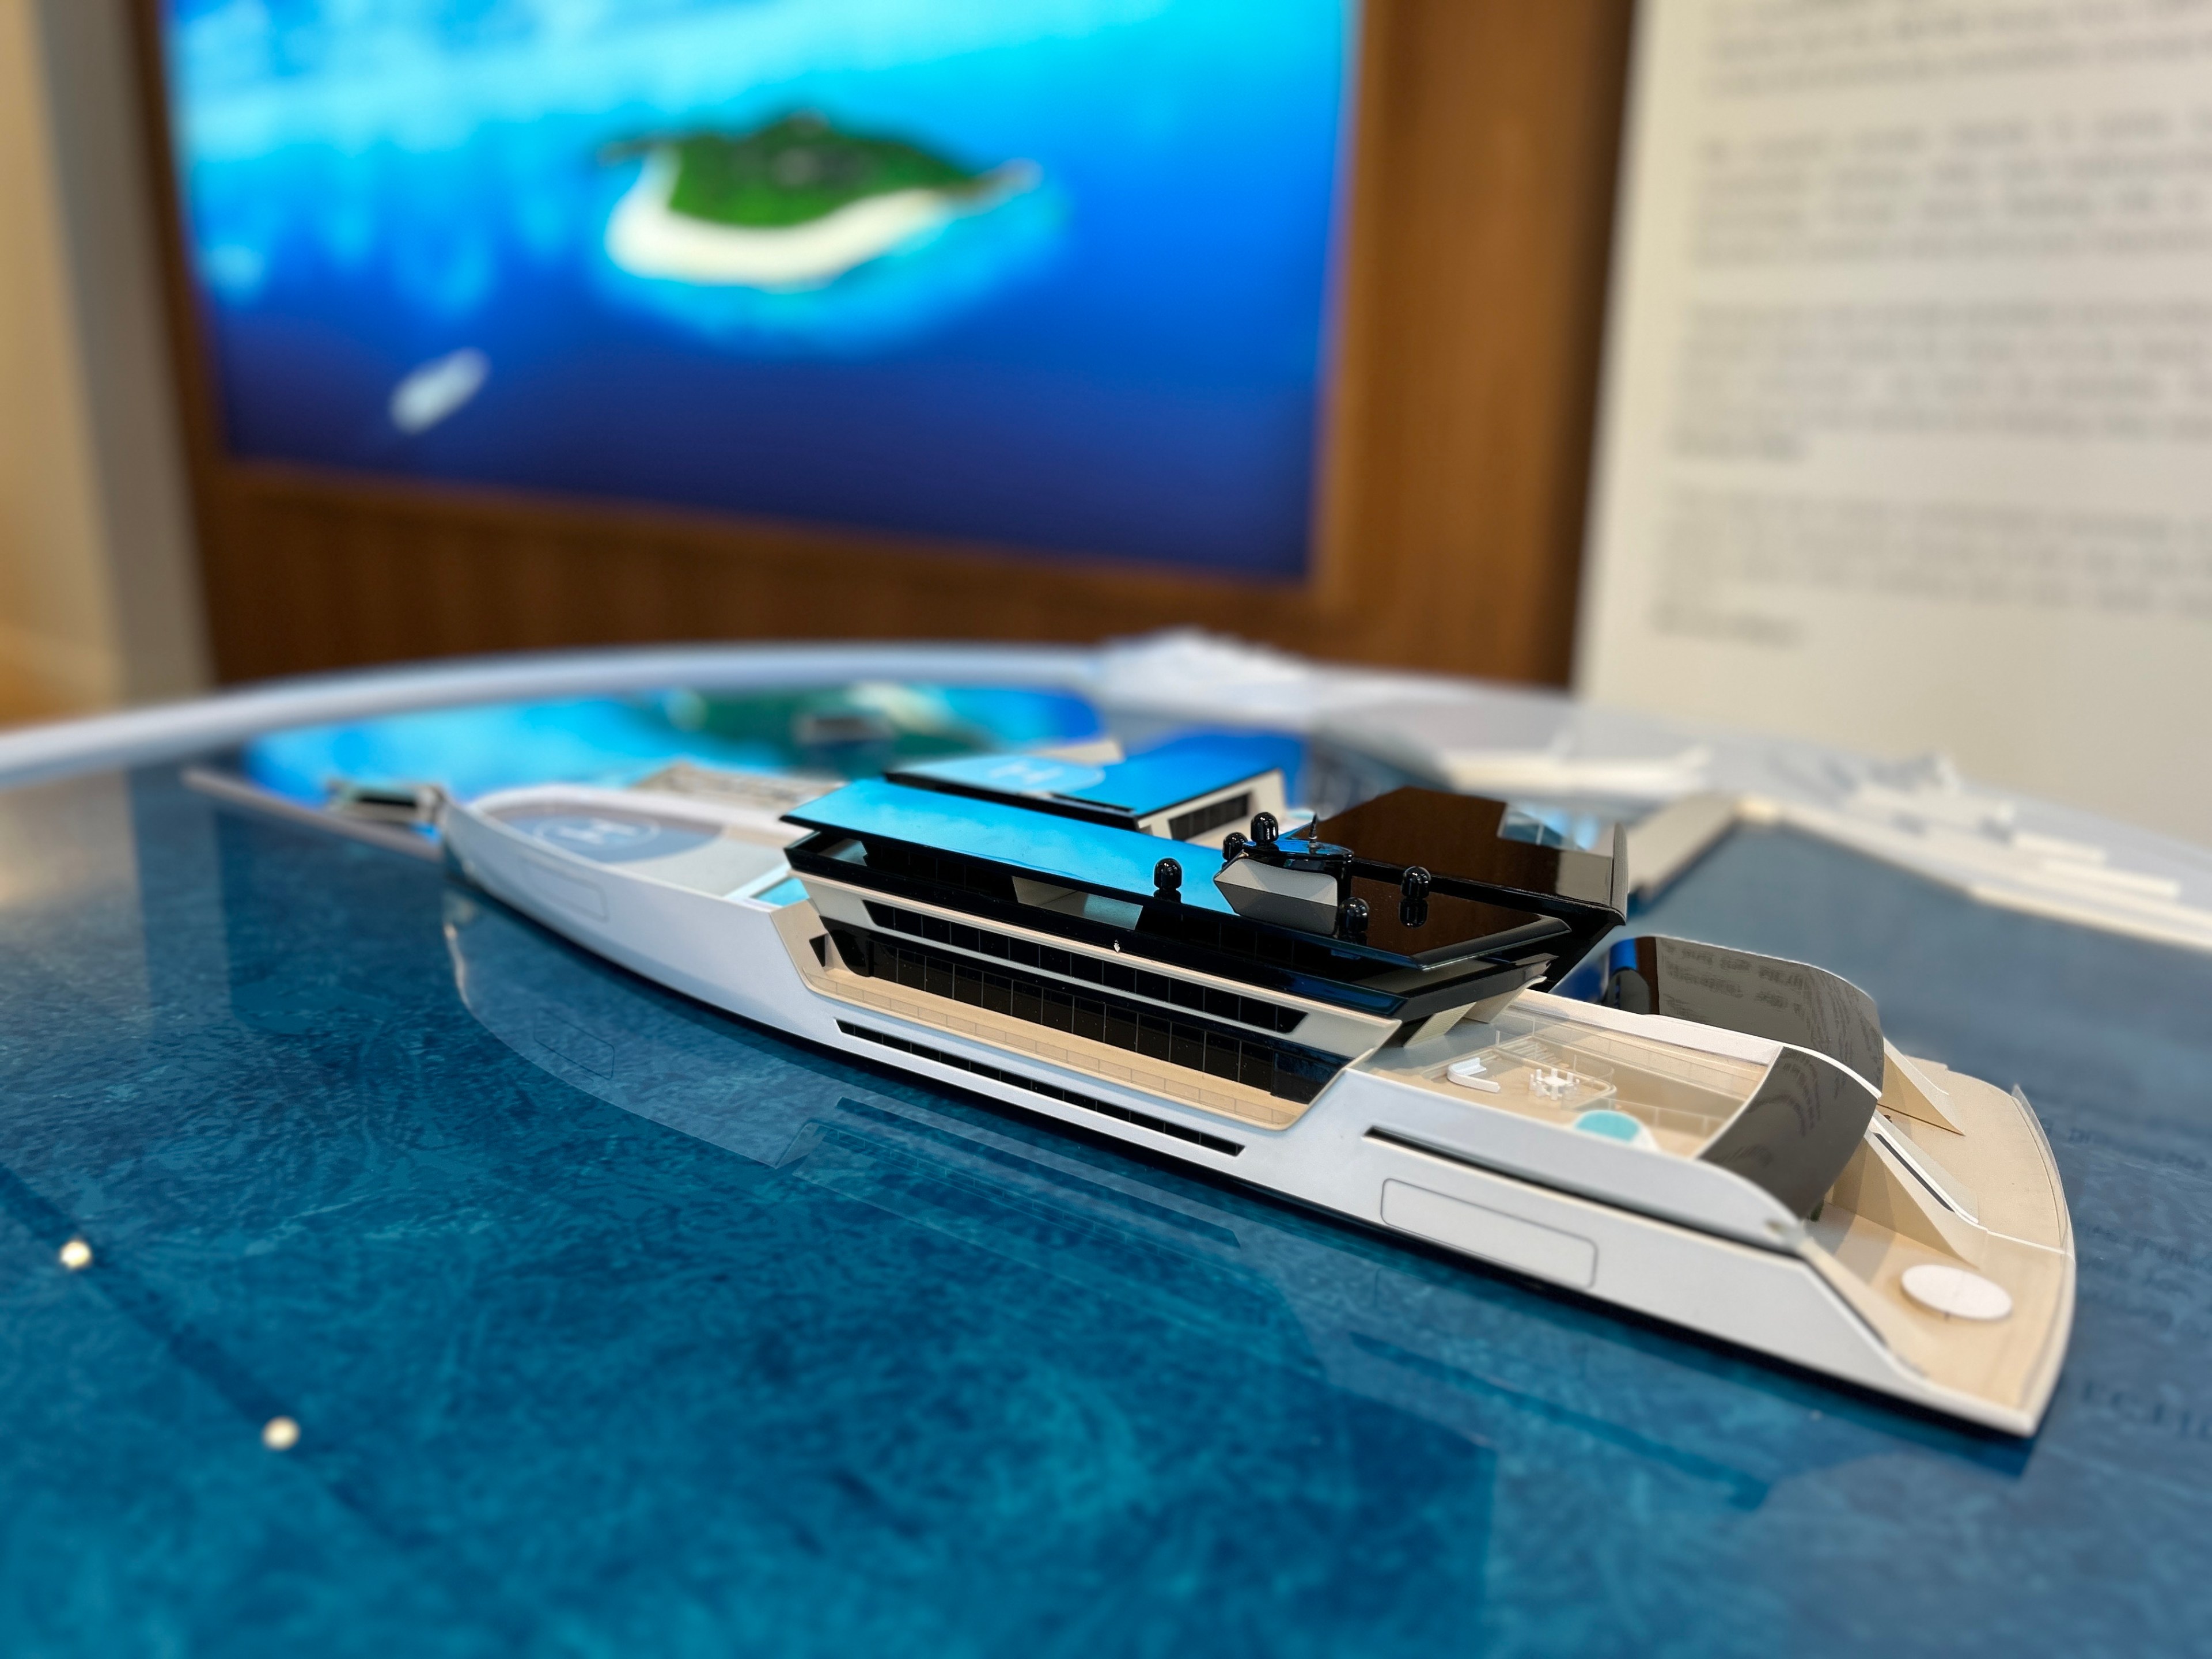 a model of a superyacht on a reflective table meant to evoke the ocean, with a screen showing a tropical island in the background